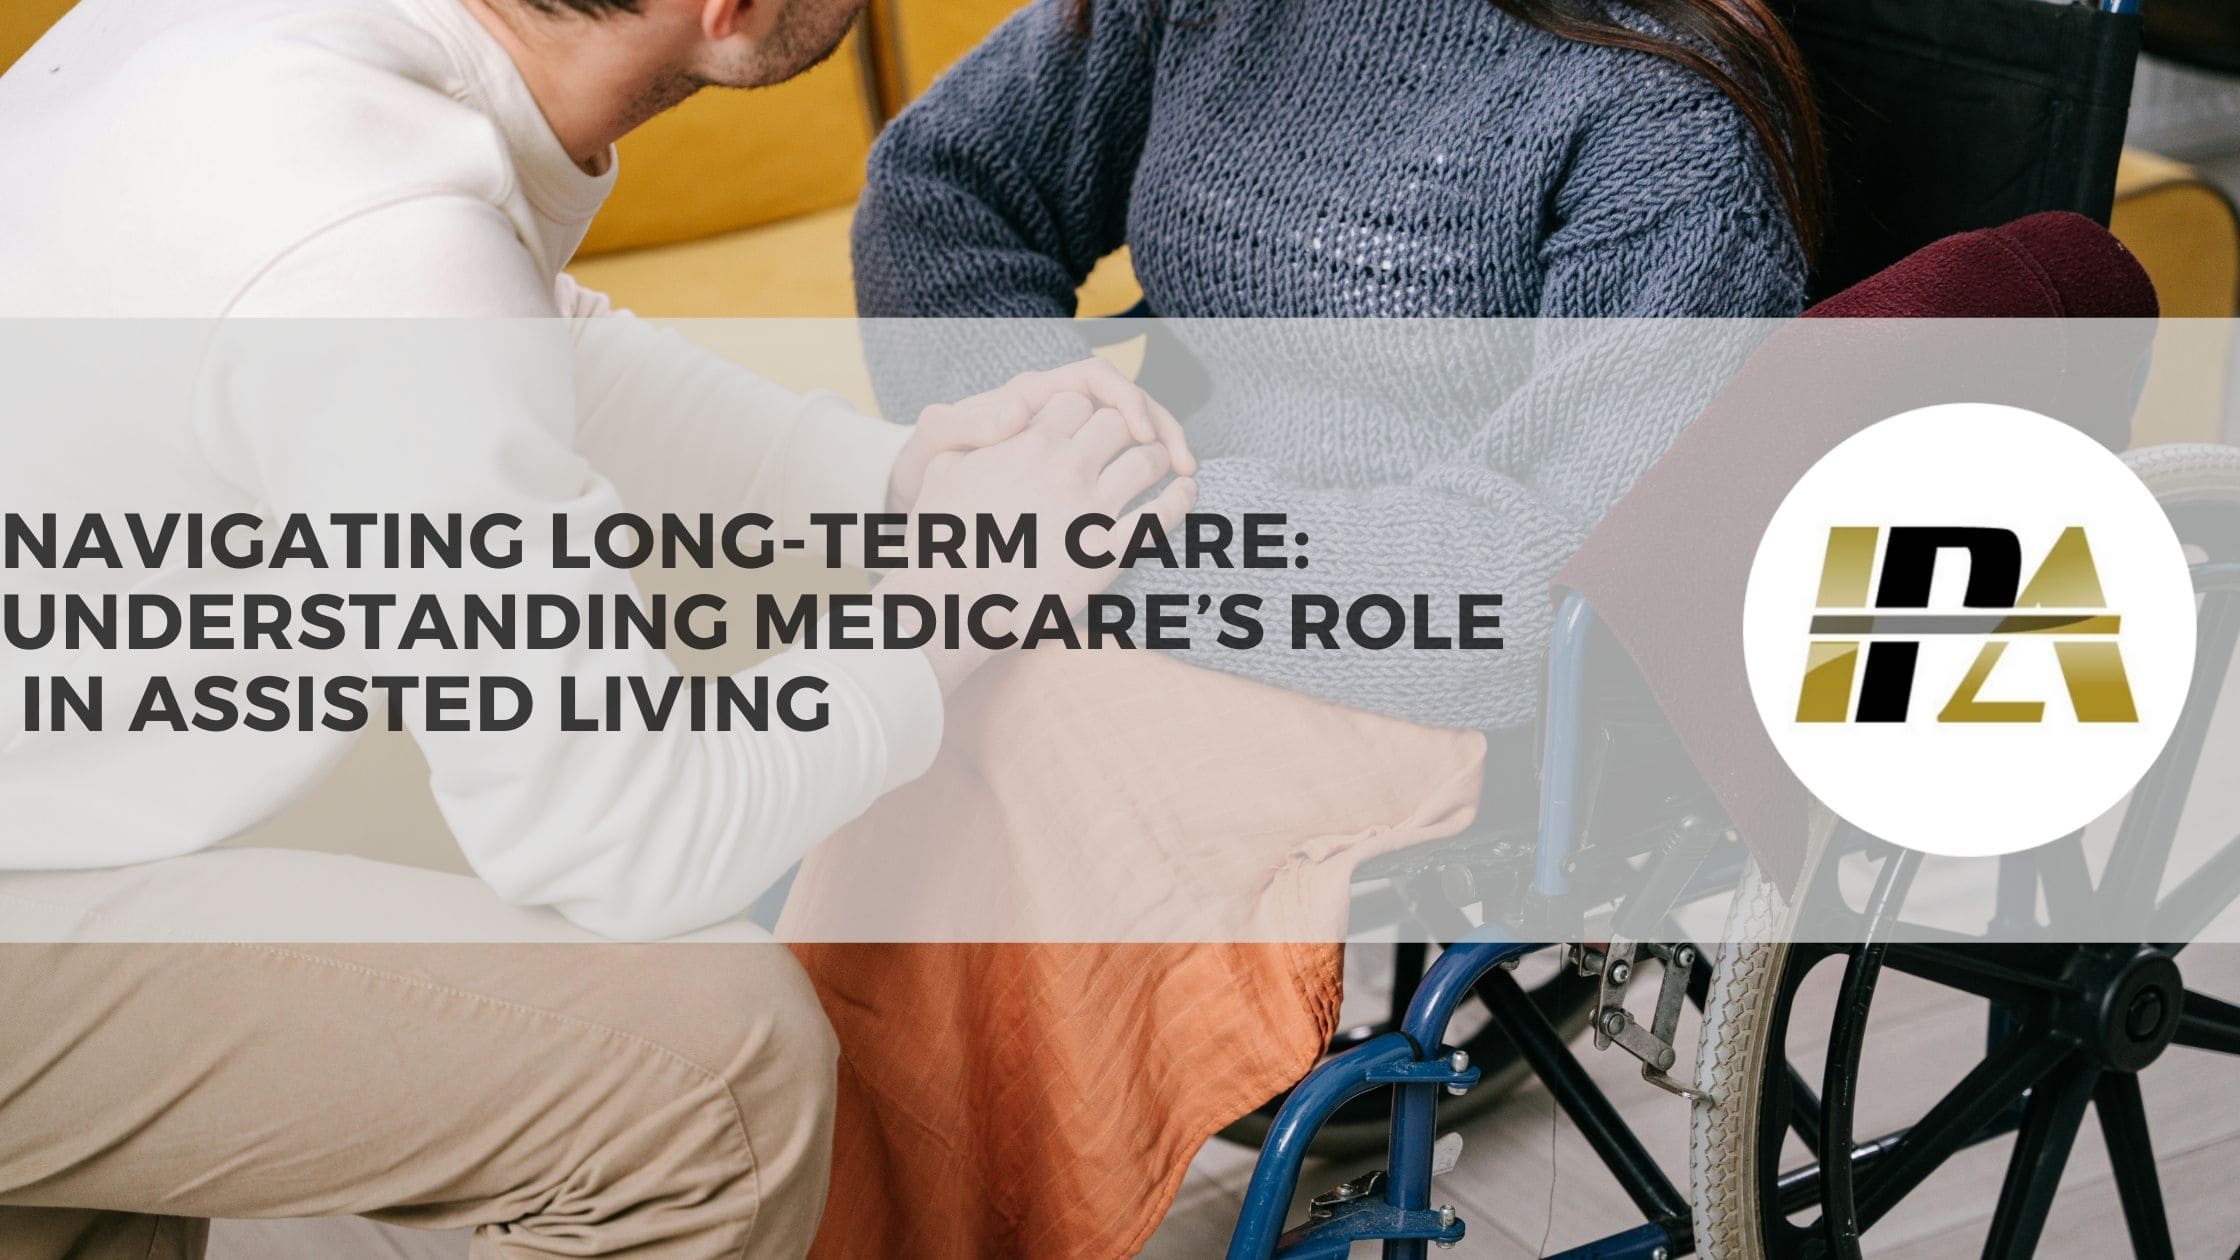 Navigating long-term care with assisted living